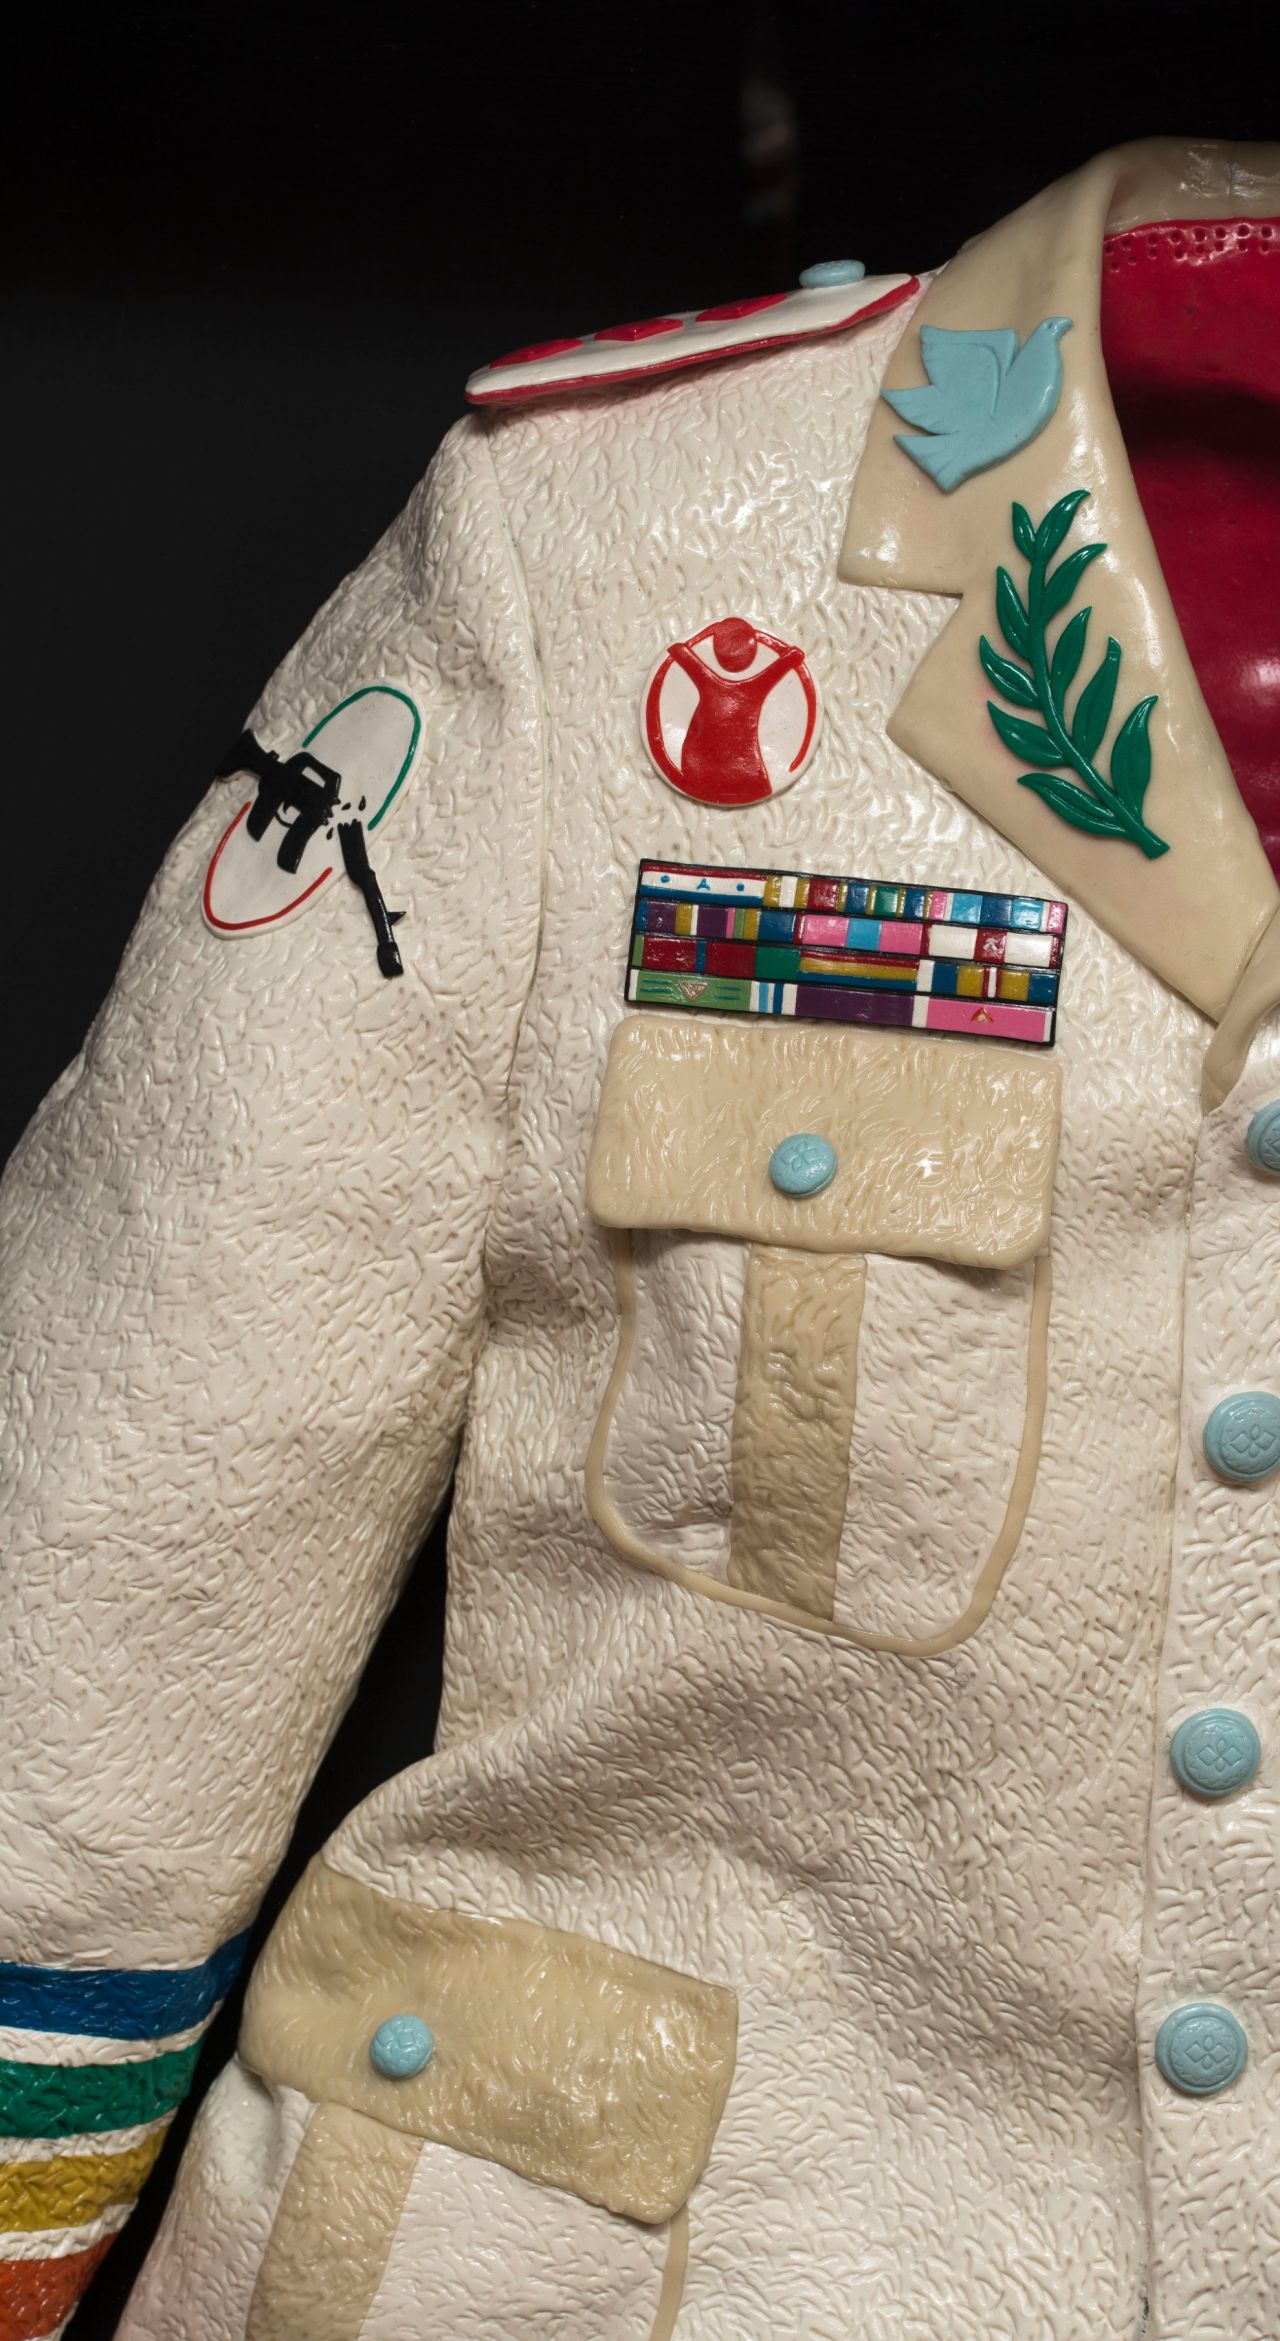 Savini created a military jacket bearing logos of peace in one of his latest sculptures.